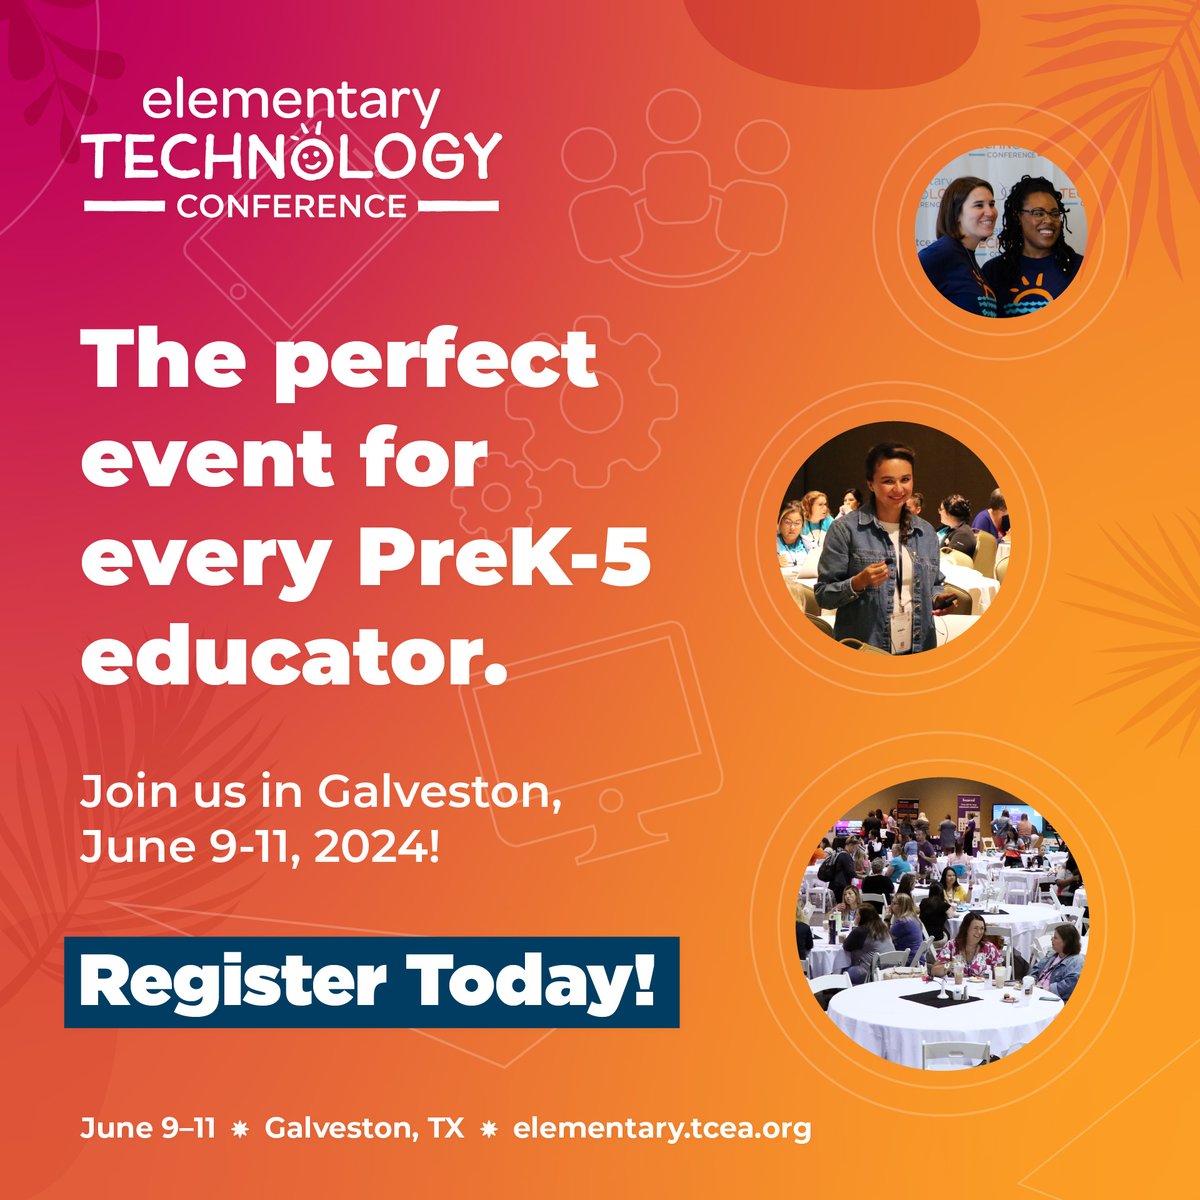 The EXHIBIT HALL at the Elementary Technology Conference is going to be bigger and better than ever this summer! Are you coming❓❓❓

sbee.link/pkje7vhqf8
 #elemchat #txed #teacherpd #profdev